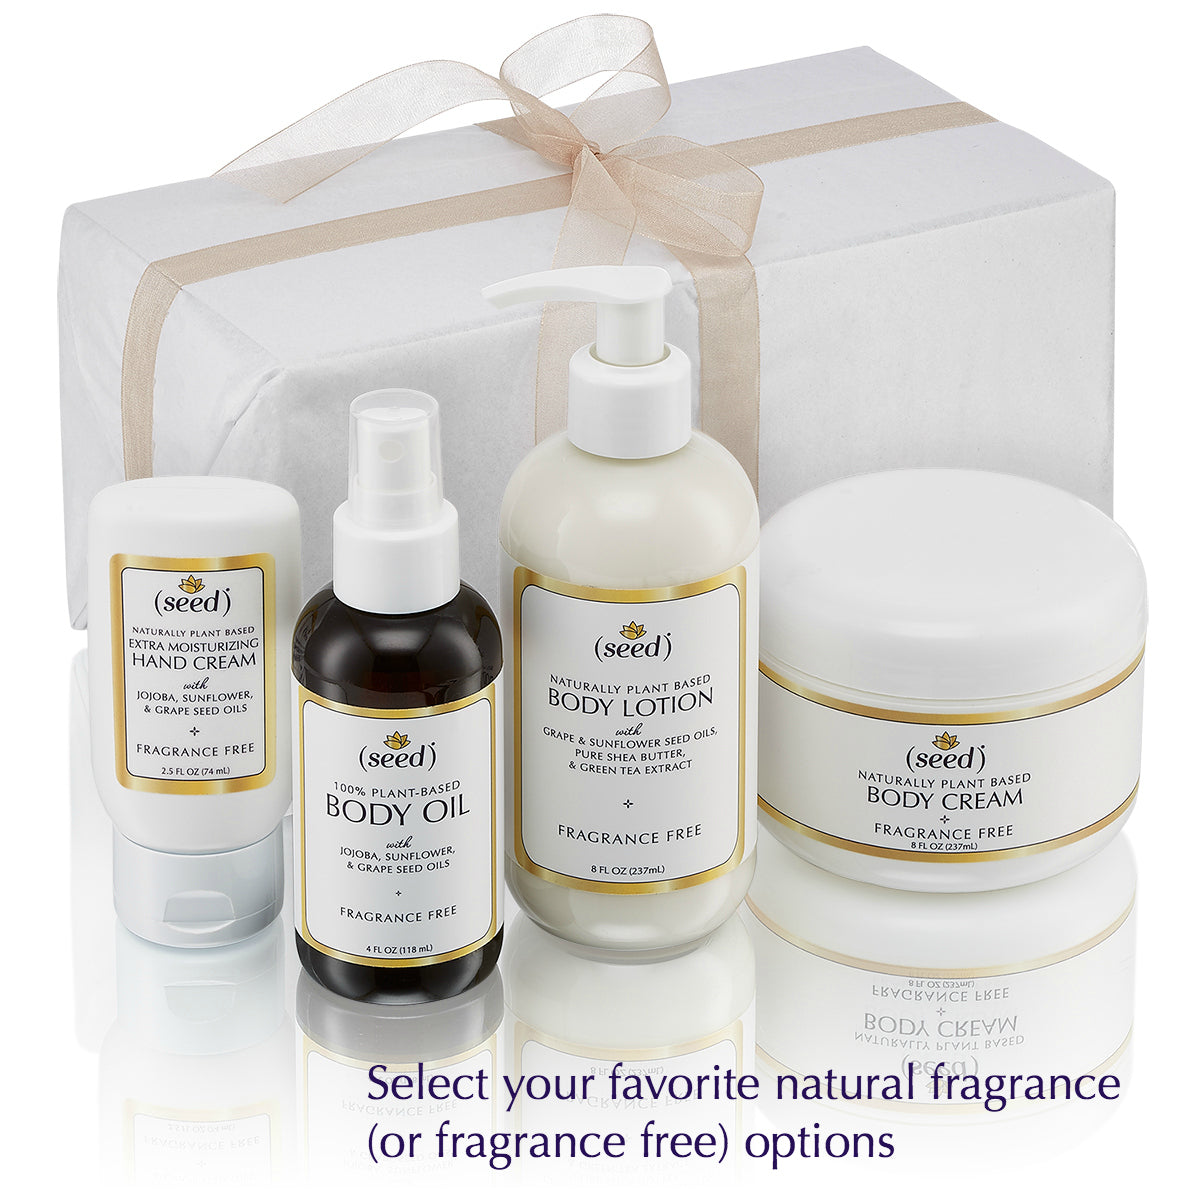 Seeds of Change Gift wrapped gift set from Seed Body Care